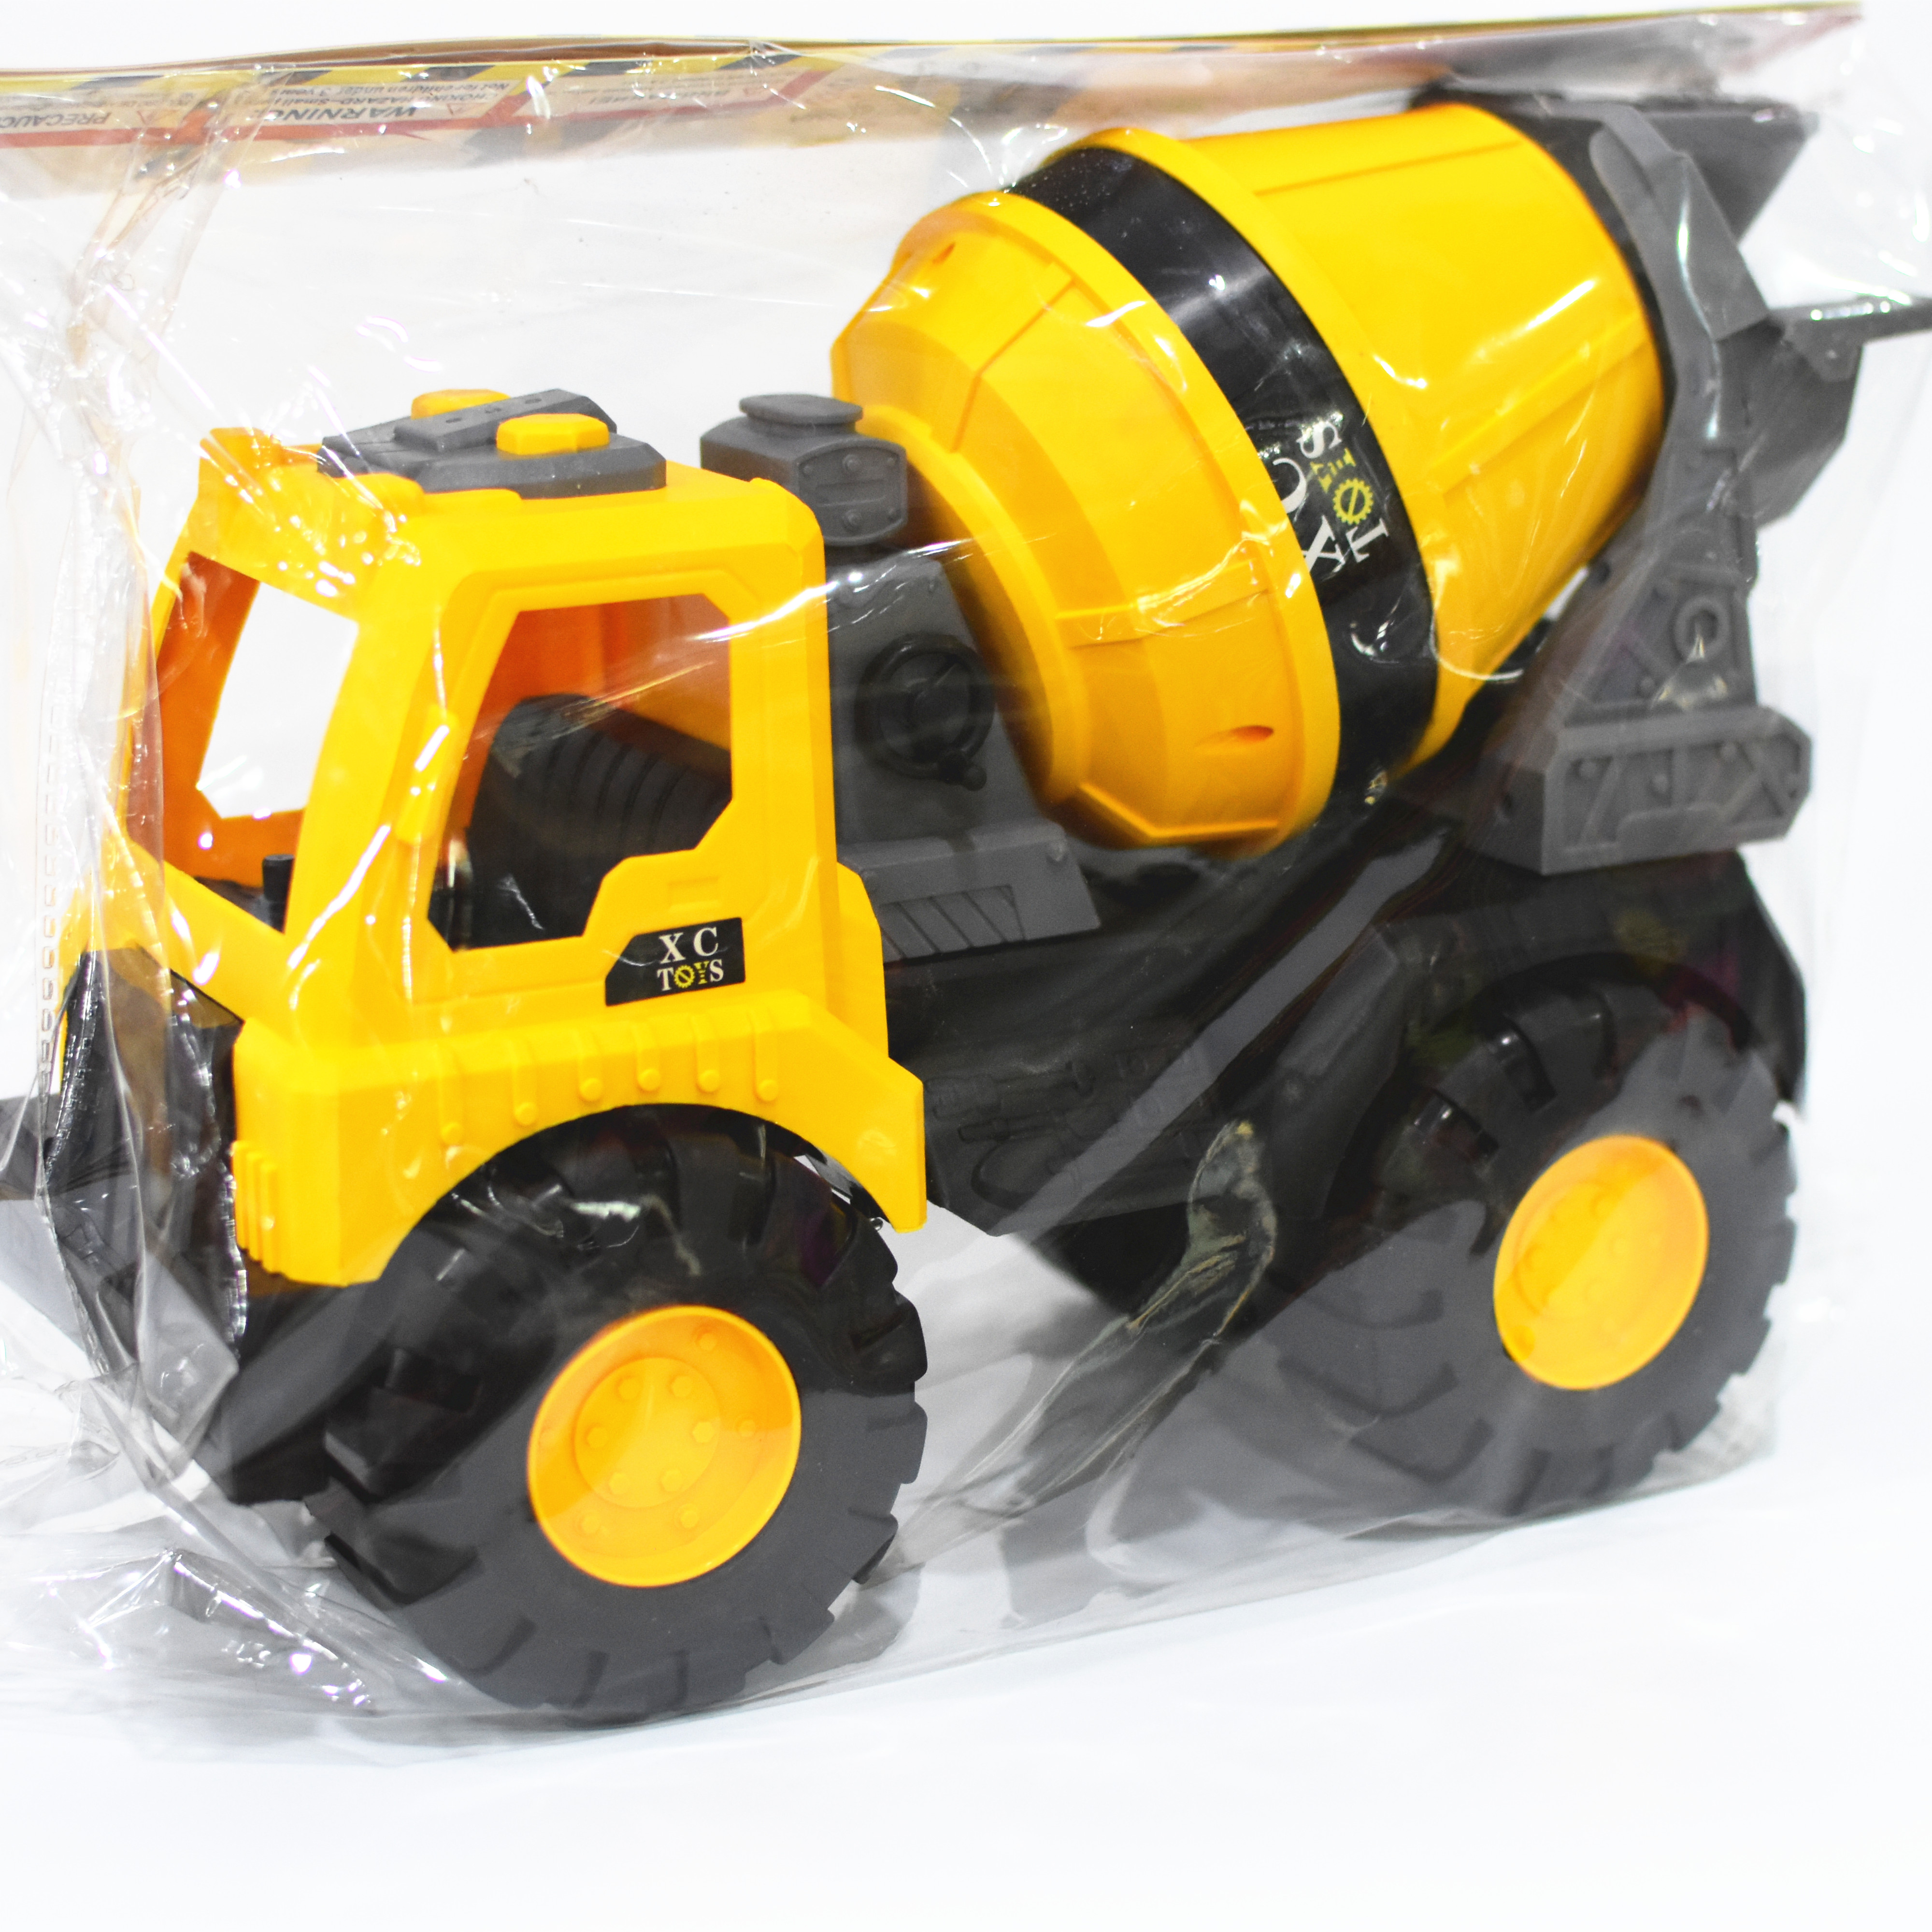 FREE WHEEL TRUCK TOY LY1343